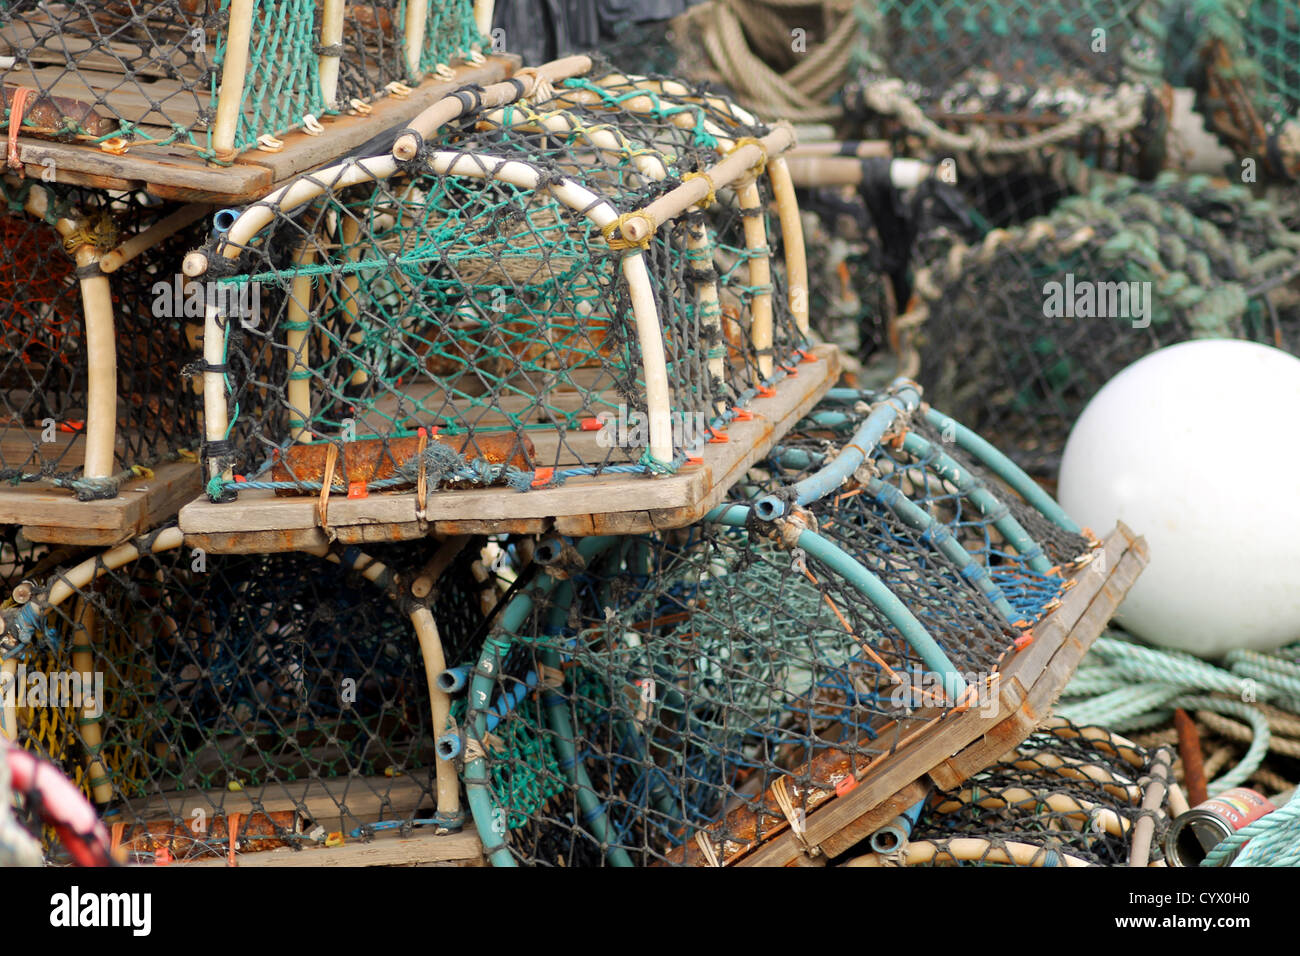 Lobster pots and creels in pile seen in harbor. Stock Photo